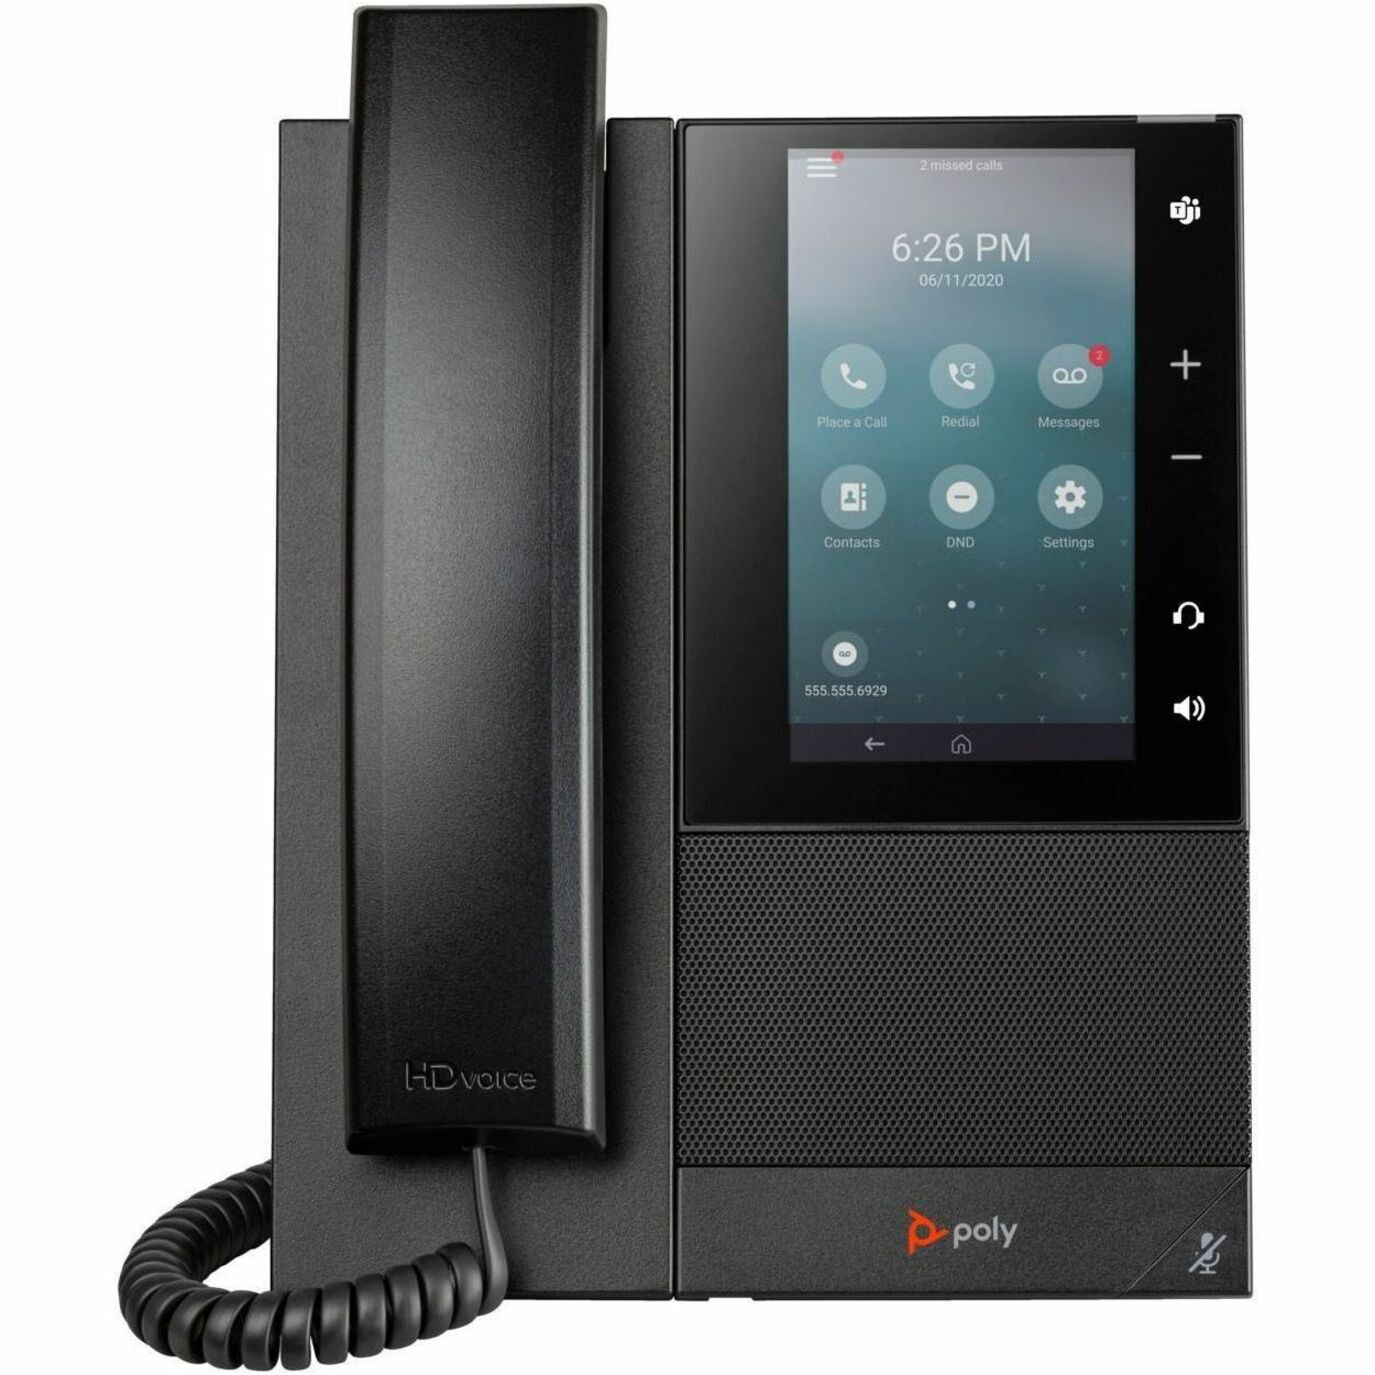 Poly 82Z78AA CCX 500 Business Media Phone with Open SIP and PoE-enabled, Caller ID, Speakerphone, VoIP